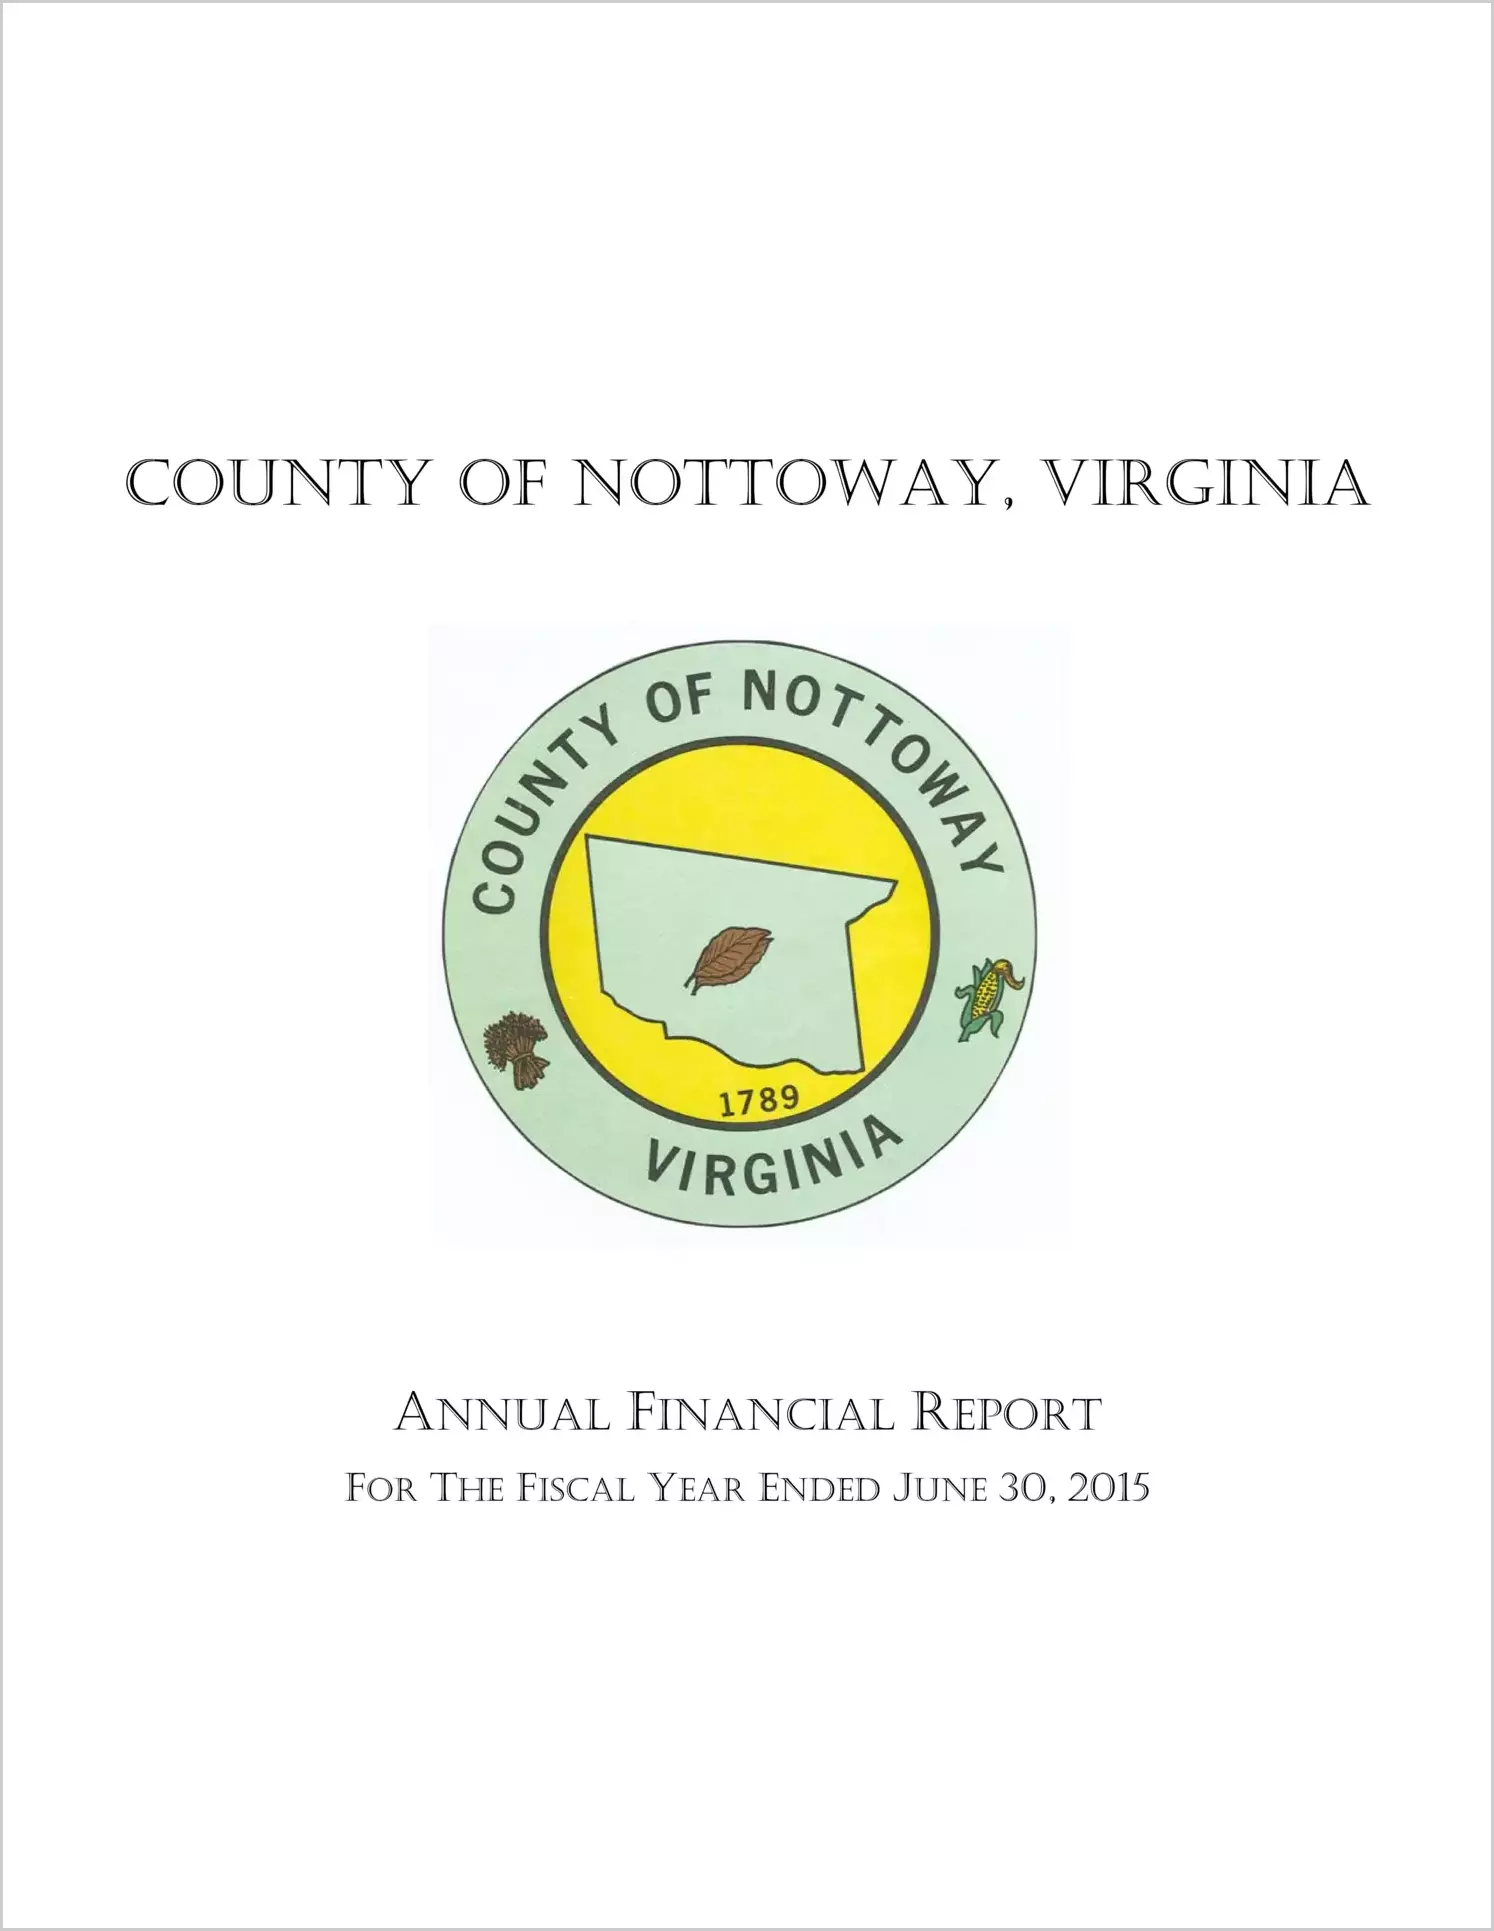 2015 Annual Financial Report for County of Nottoway